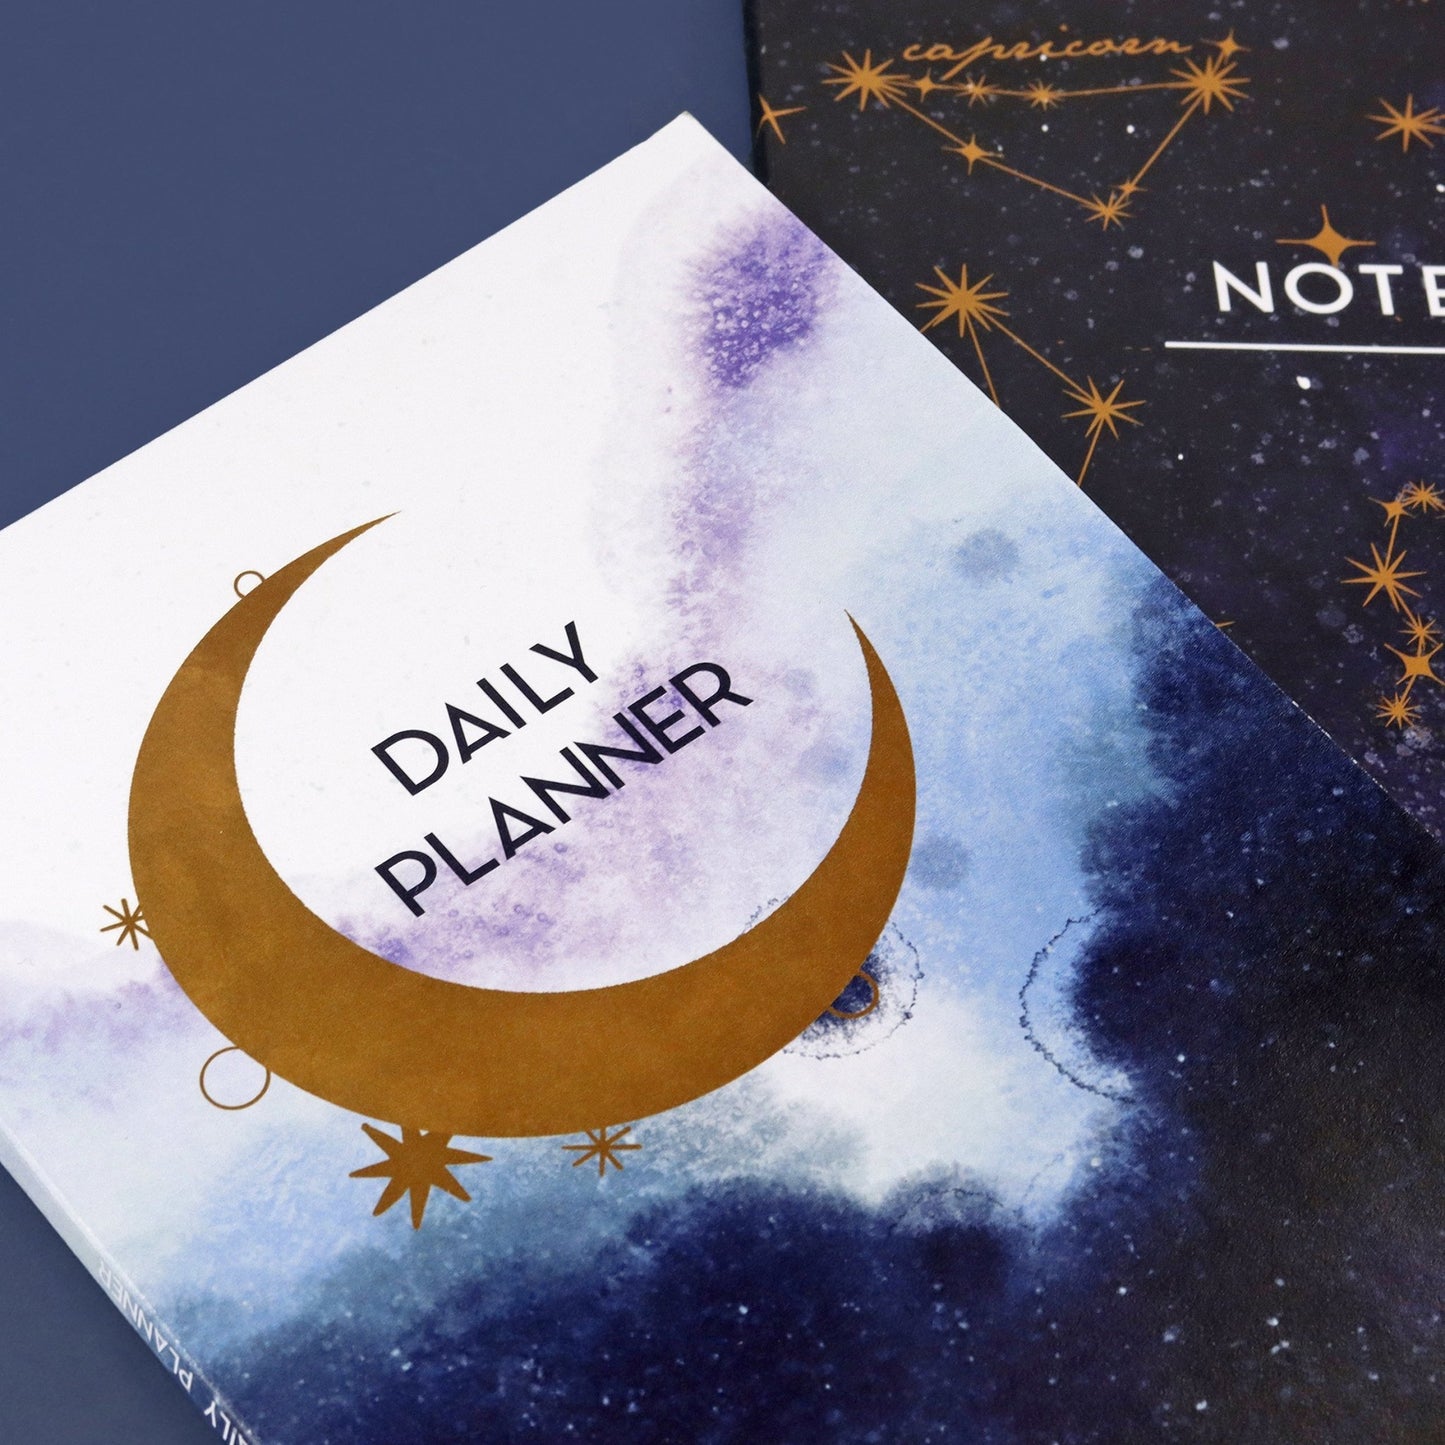 Celestial Moon Daily Planner - Fawn and Thistle